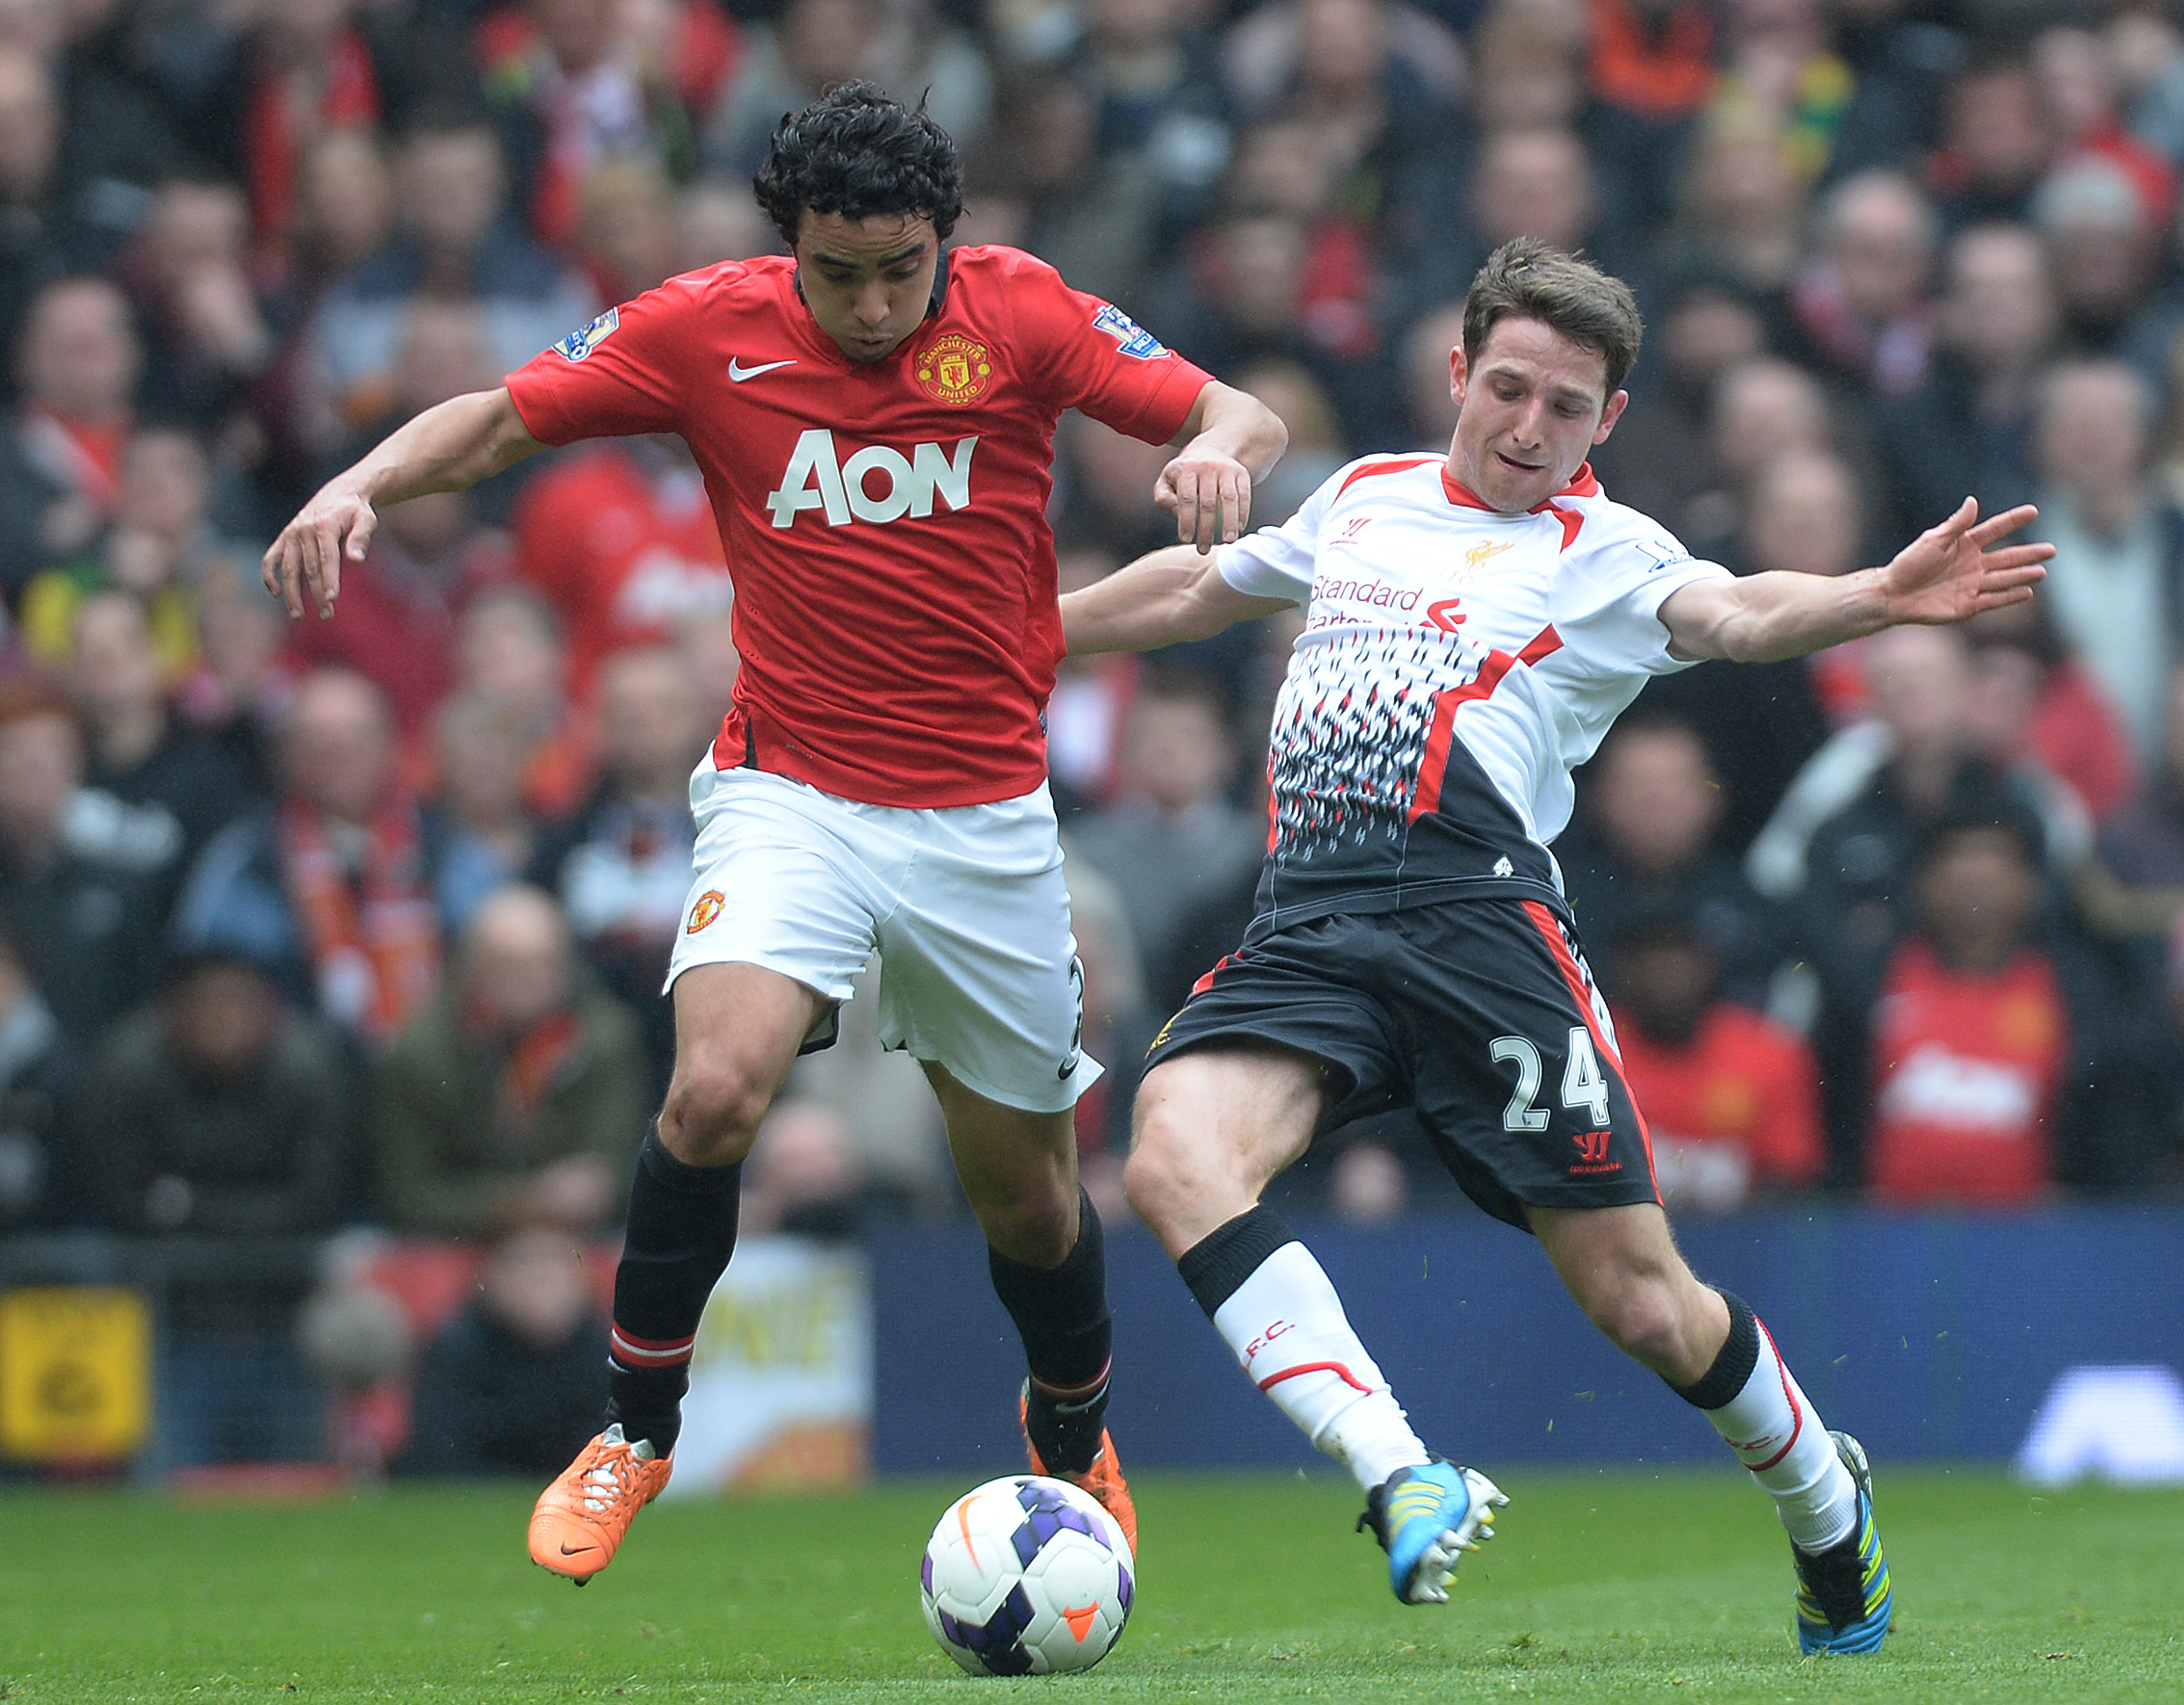 epa04128650 Liverpool's Joe Allen (R) in action with Manchester United's Rafael Da Silva (L) during the English Premier League soccer match Manchester United FC vs Liverpool FC at Old Trafford, Manchester, Britain, 16 March 2014.  EPA/PETER POWELL DataCo terms and conditions apply https://www.epa.eu/downloads/DataCo-TCs.pdf